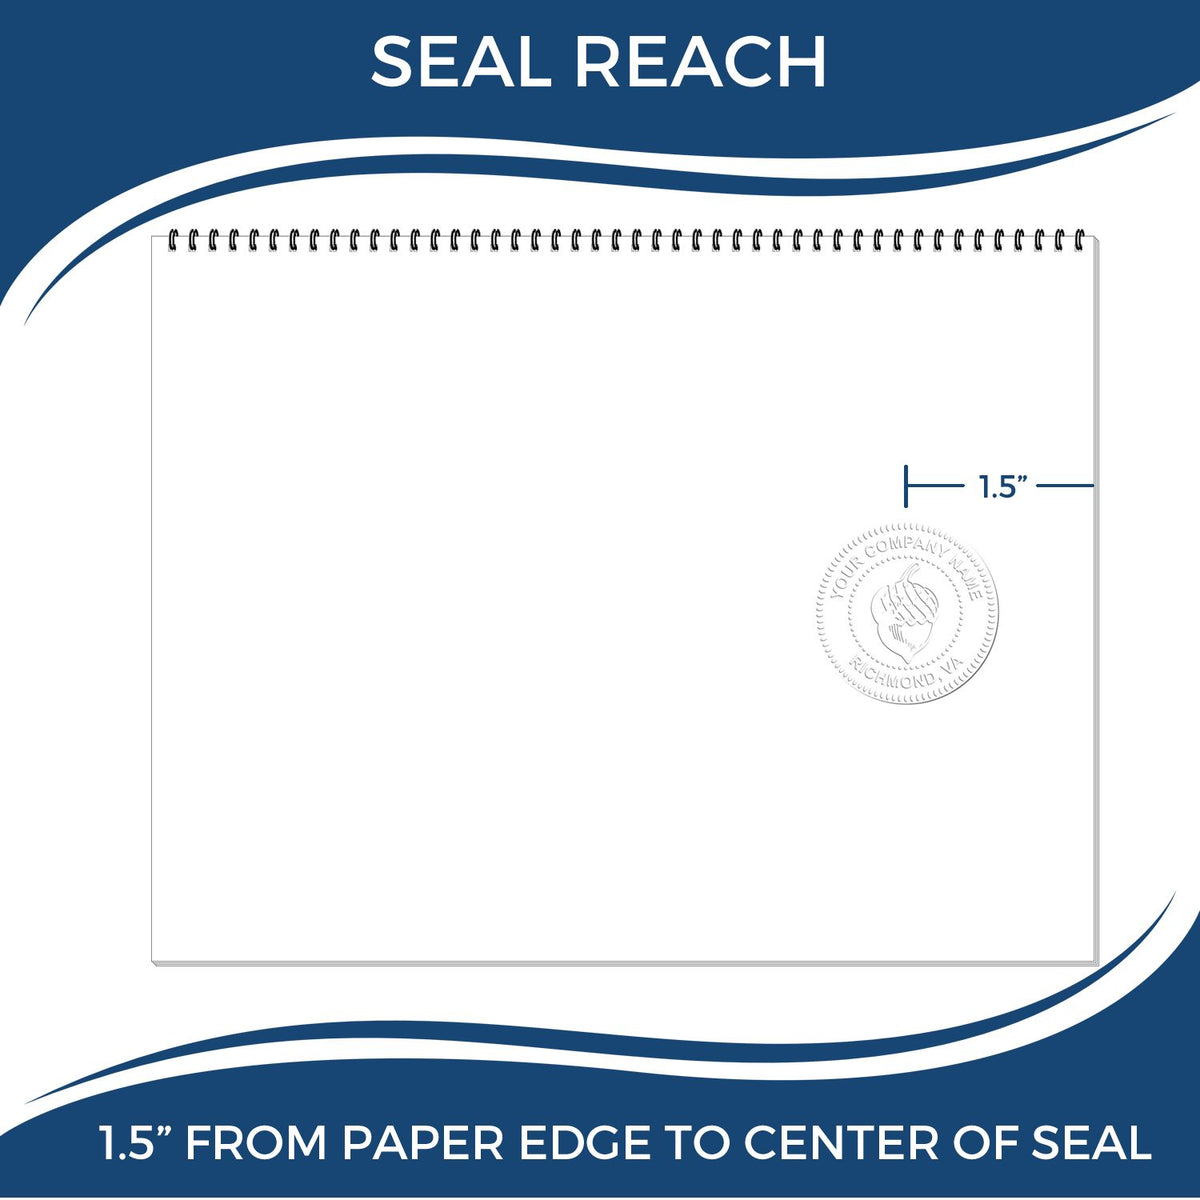 An infographic showing the seal reach which is represented by a ruler and a miniature seal image of the Wyoming Engineer Desk Seal